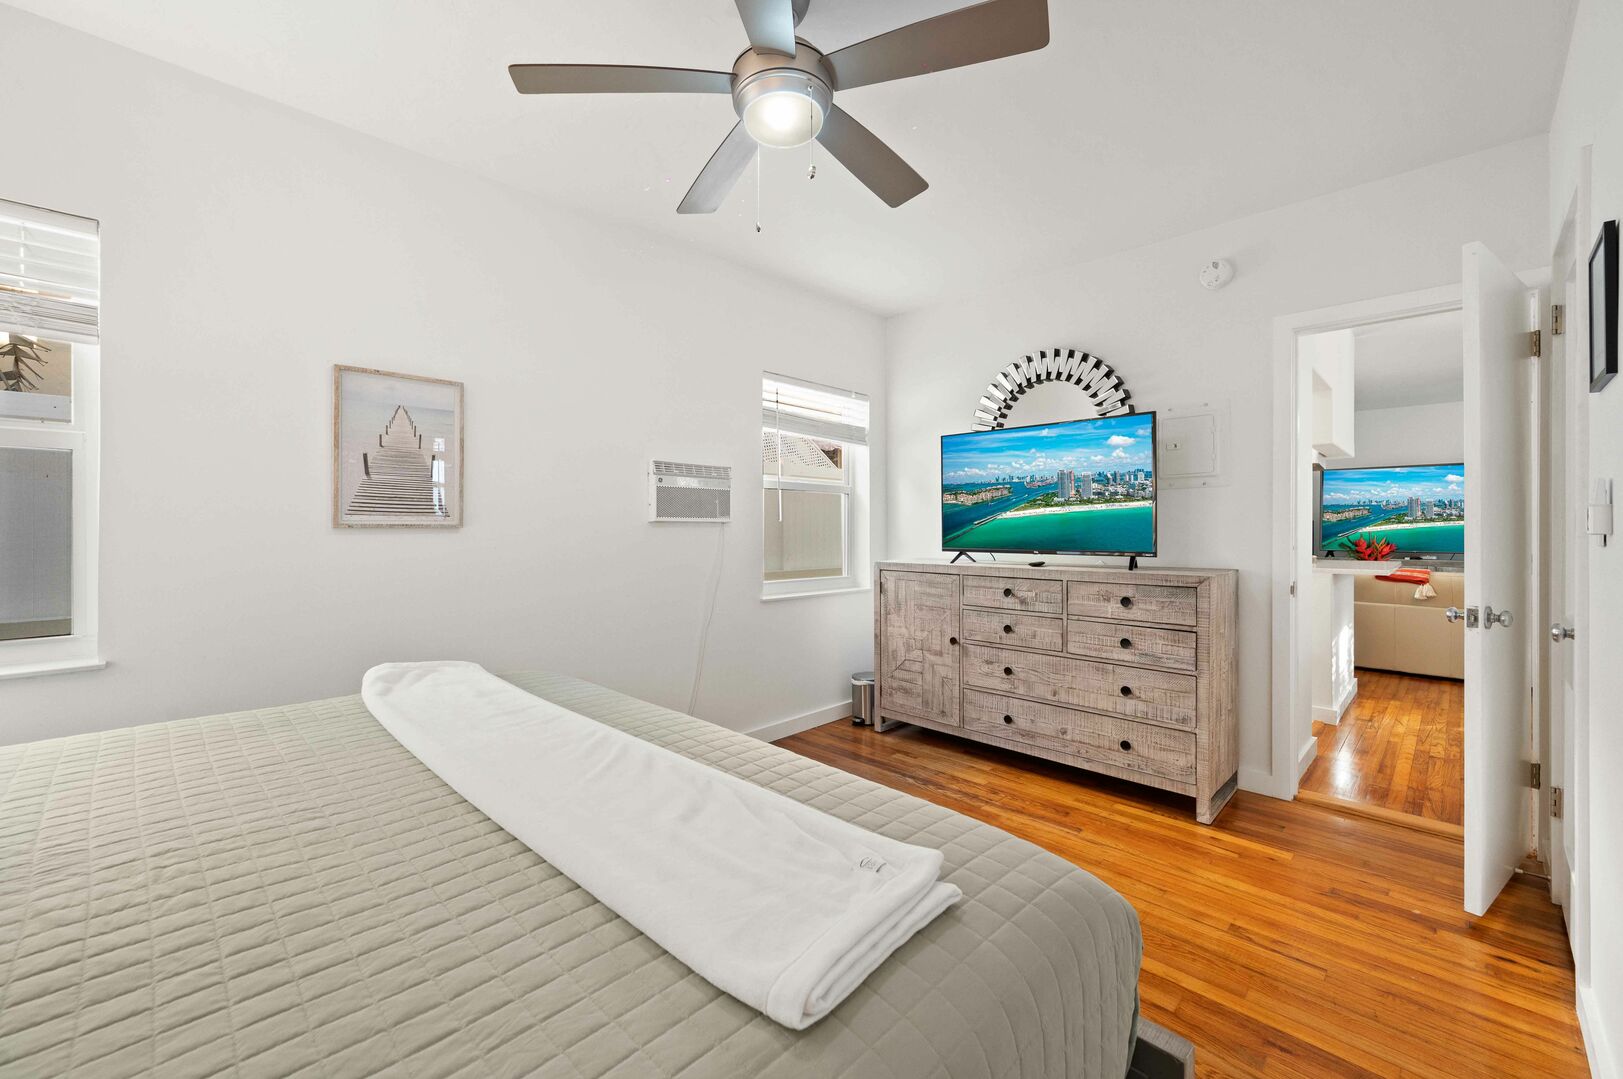 The spacious second bedroom offers plenty of daylight, a king size bed and a smart TV.